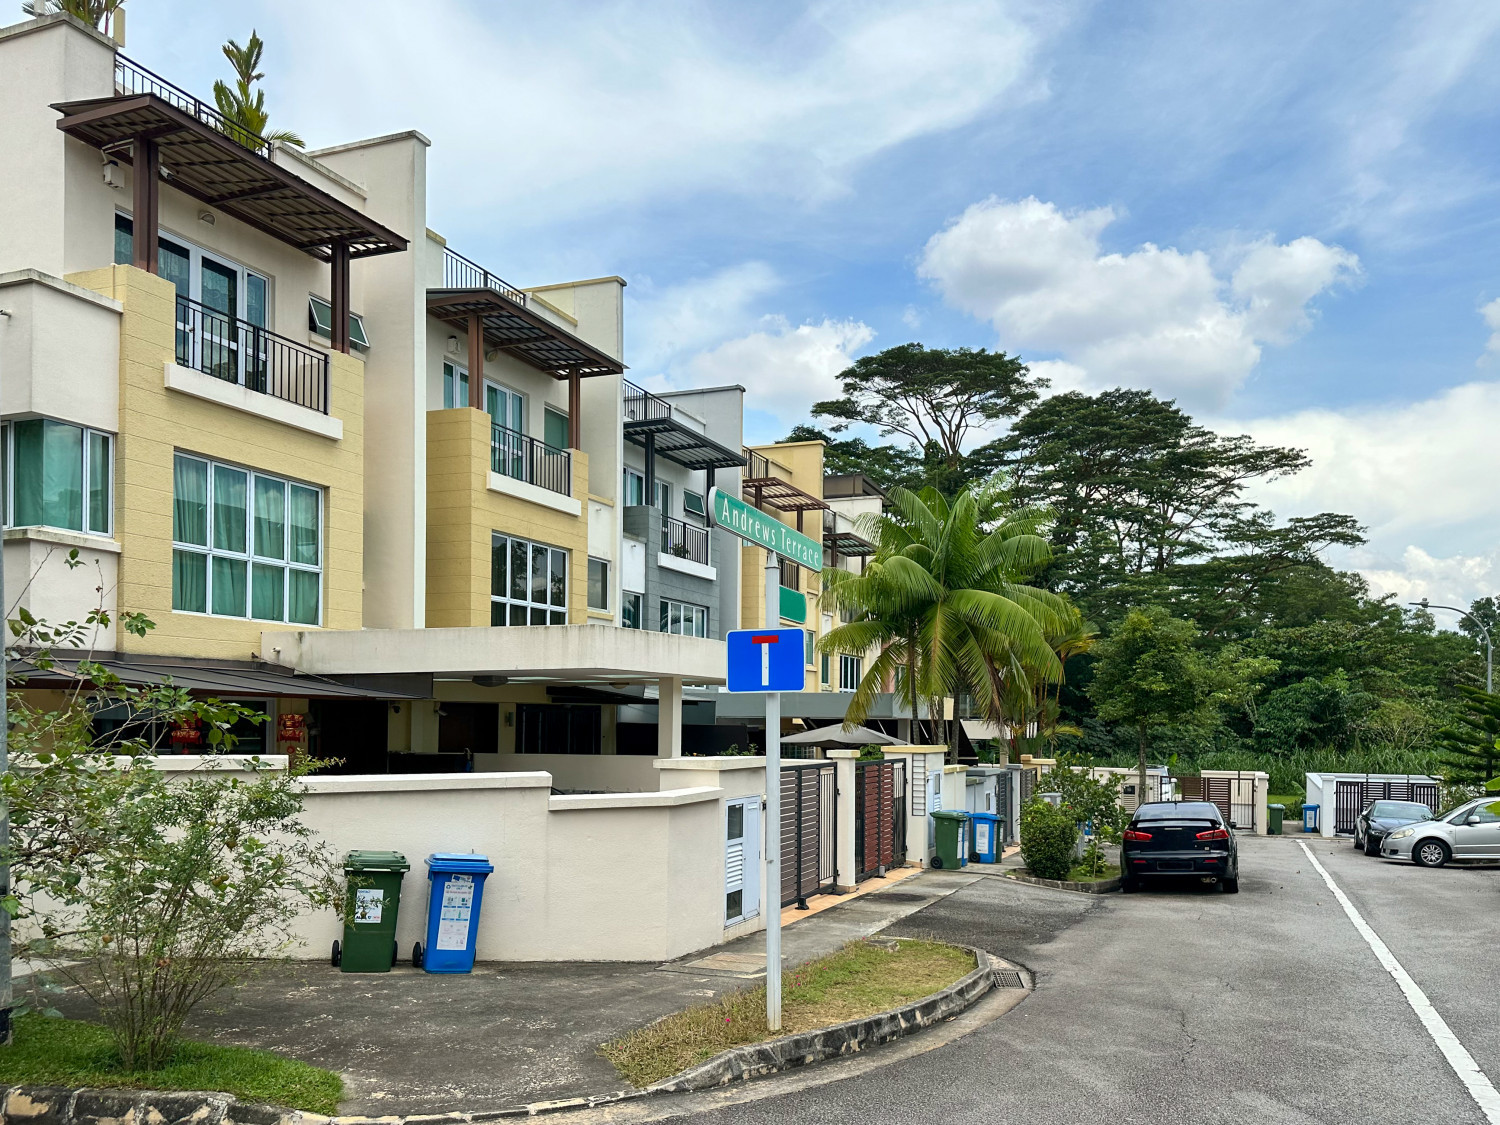 Freehold Inter-terrace house in serene Sembawang enclave for sale - Property News